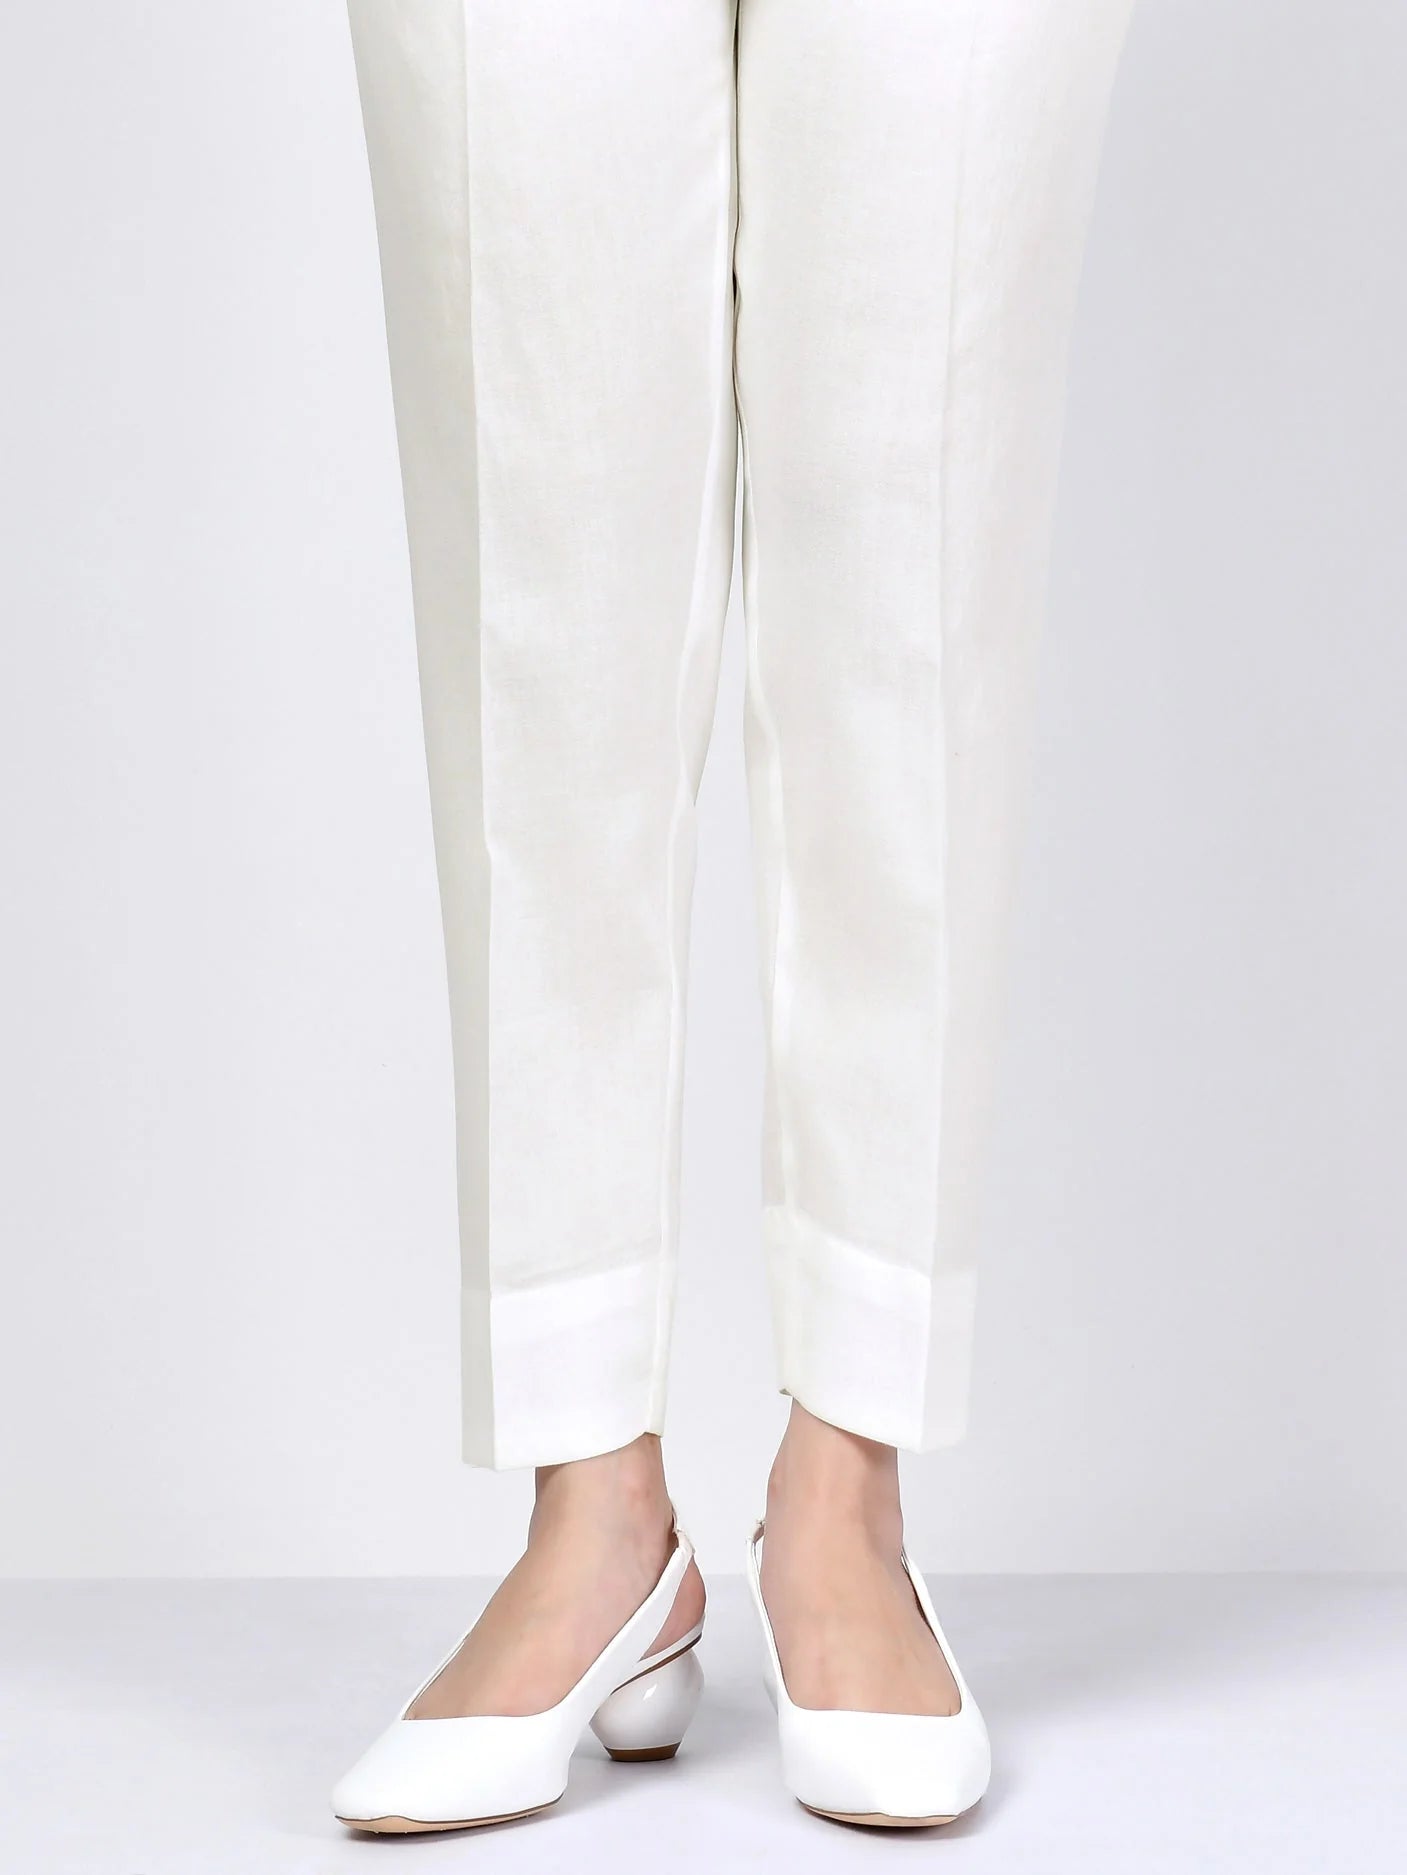 Buy Straight Pants for Women Online at the Best Price | Libas